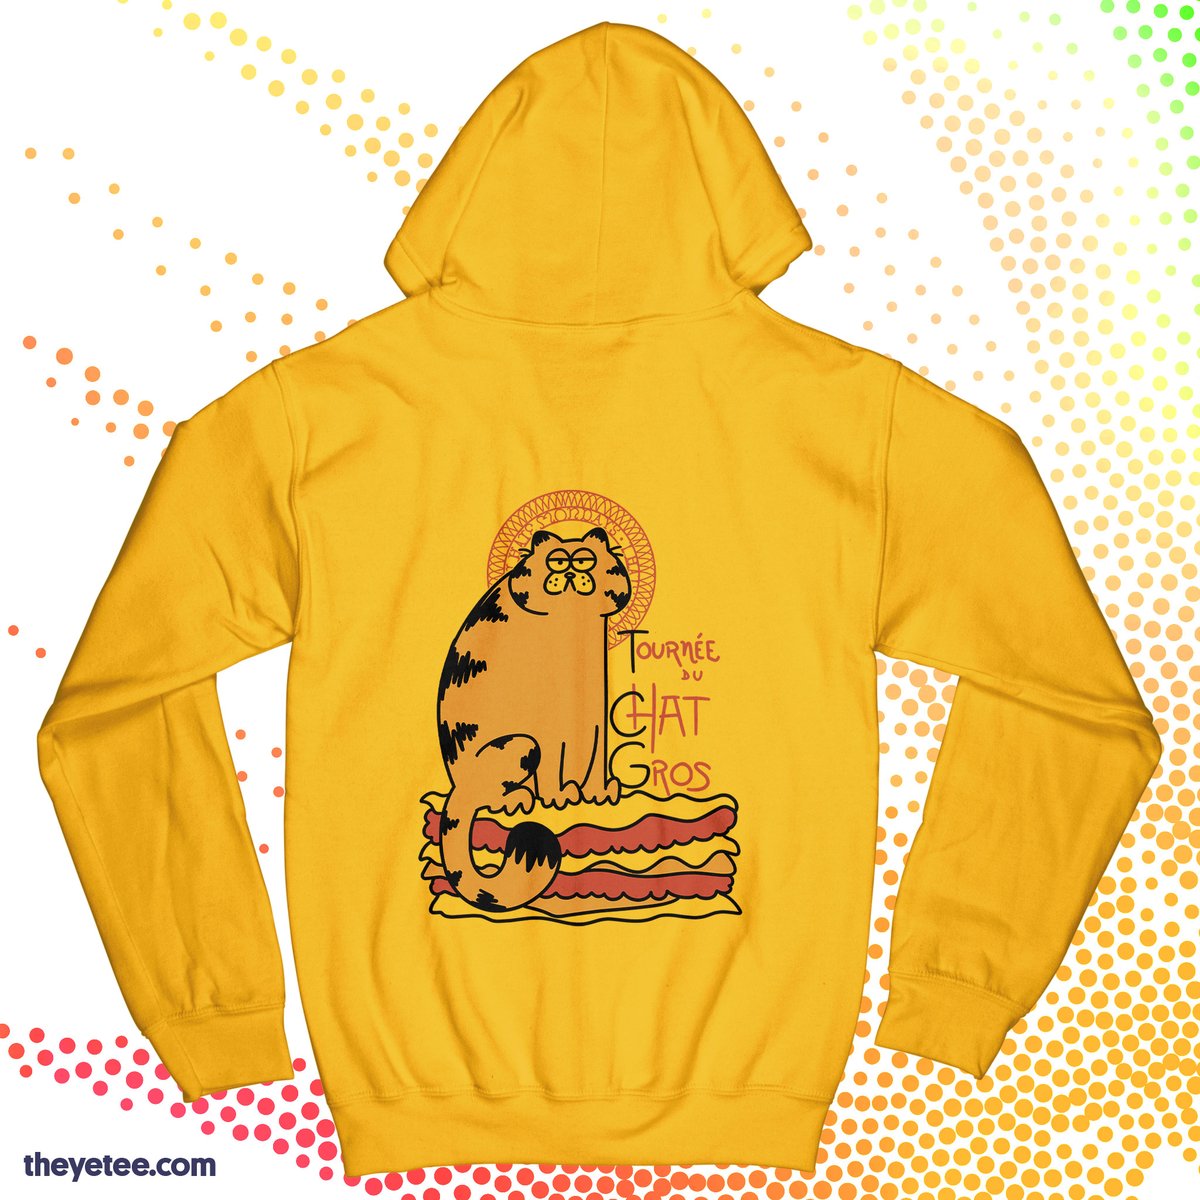 「Today's special is the lasagna, which we」|The Yetee 🌈のイラスト